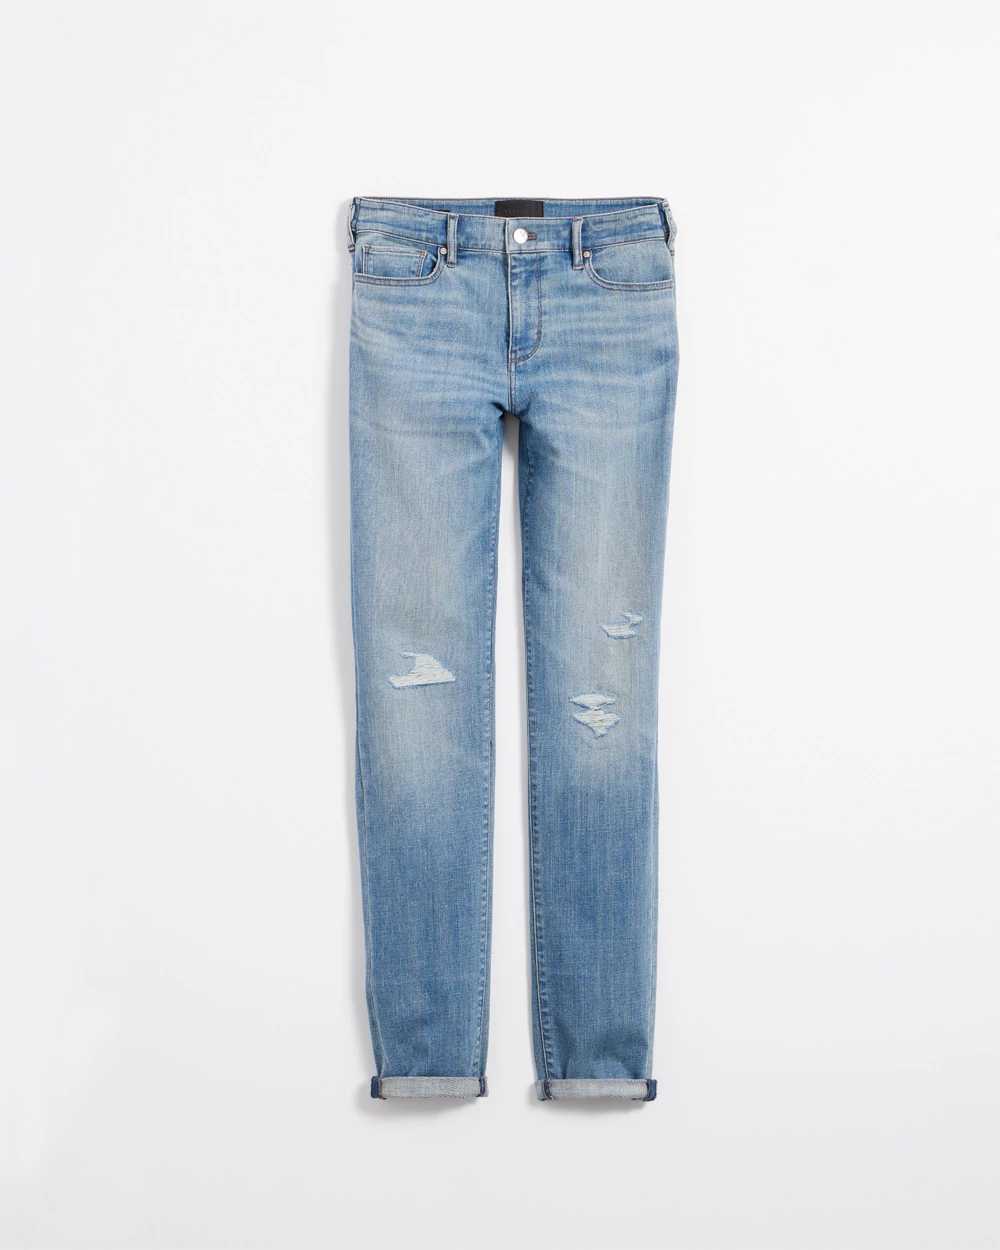 Mid Rise Everyday Soft Denim  Destructed Girlfriend Jeans click to view larger image.